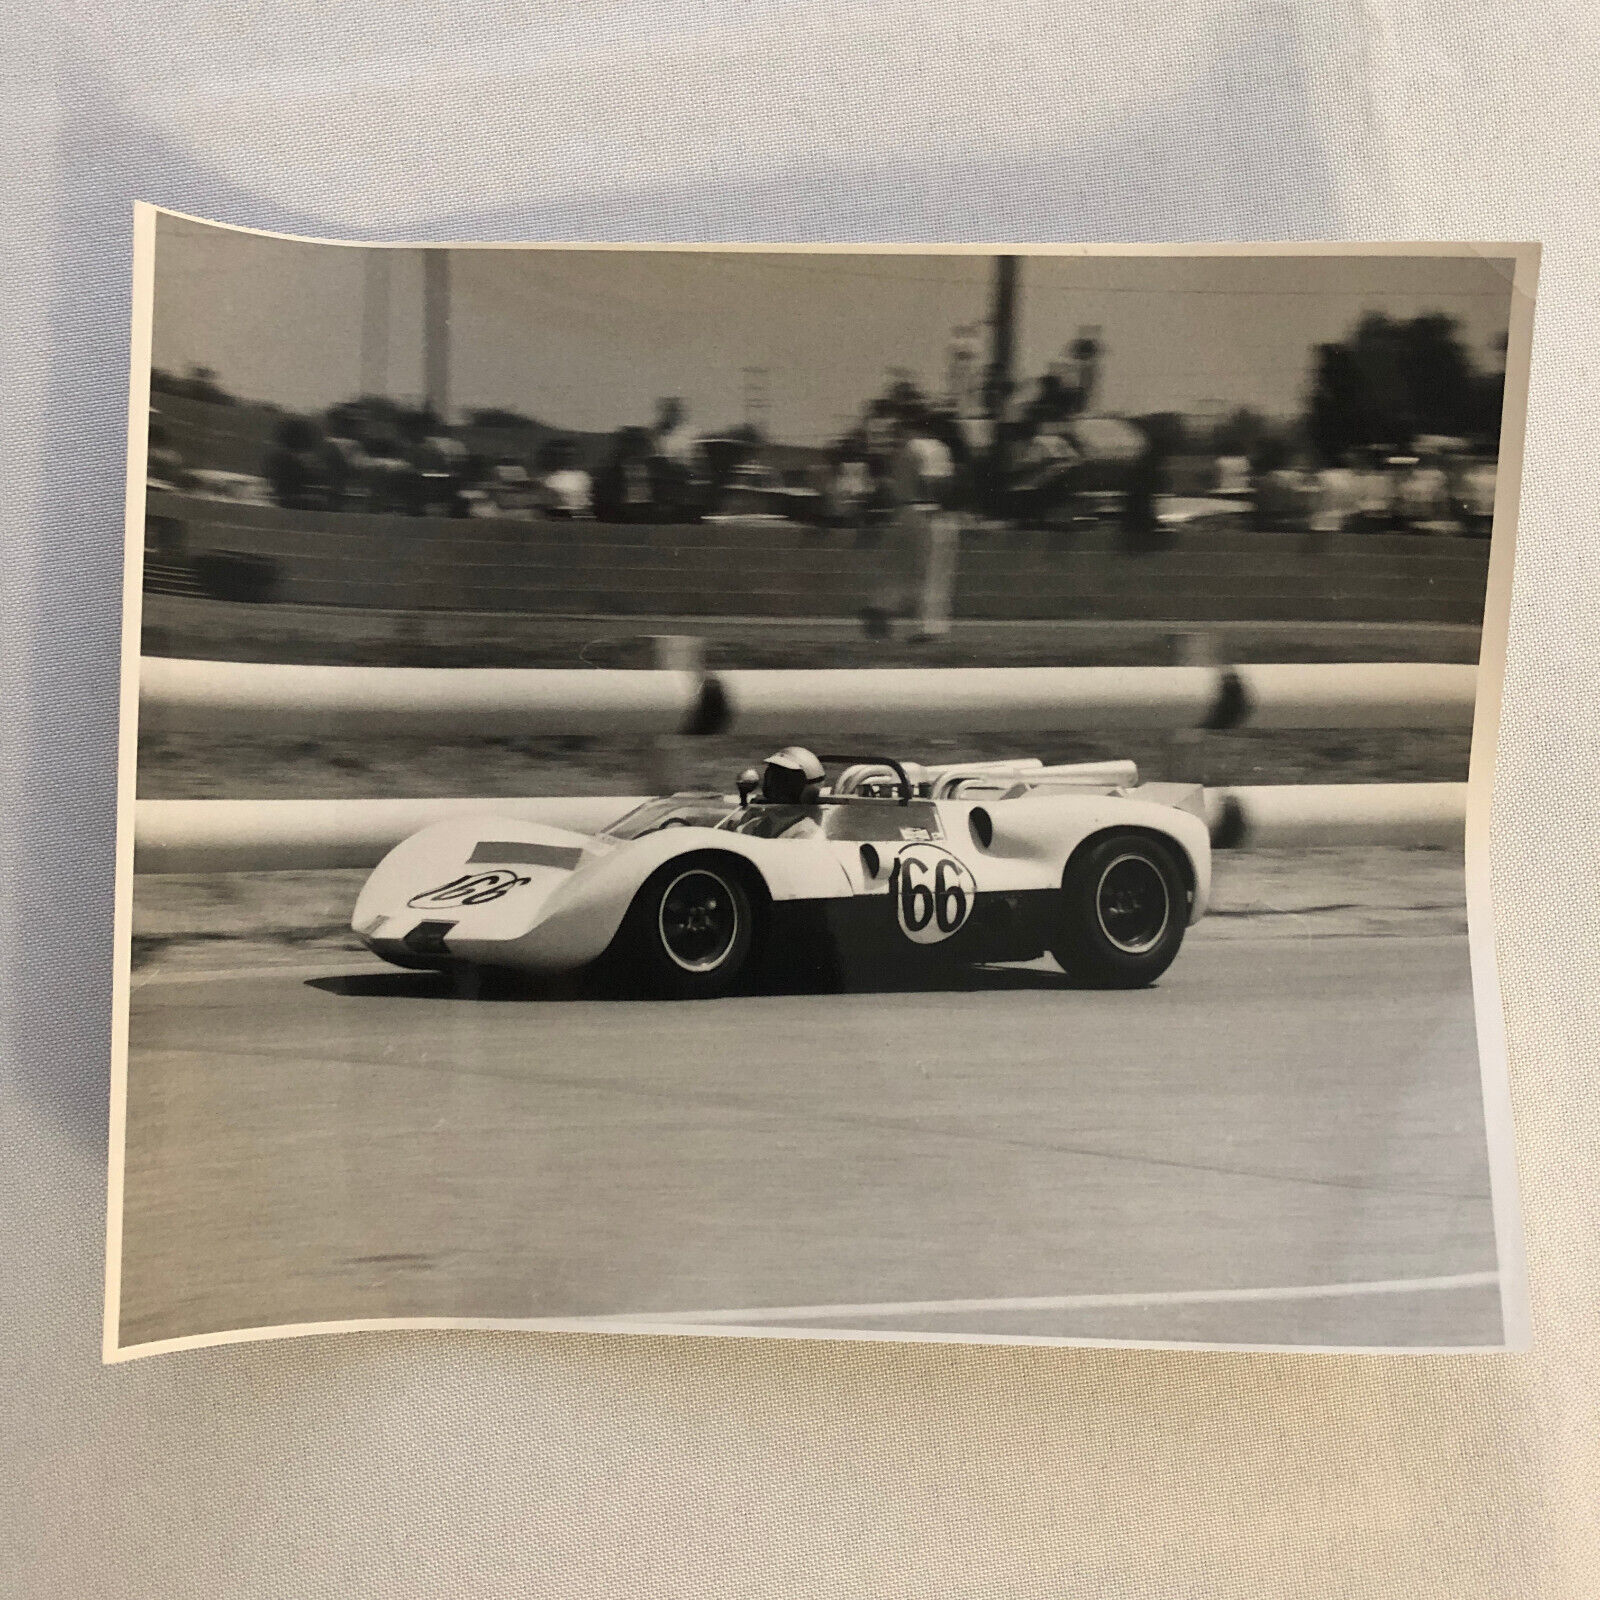 Vintage Racing Photo Photograph Can AM CanAm Riverside Jim Hall Chaparral 1964